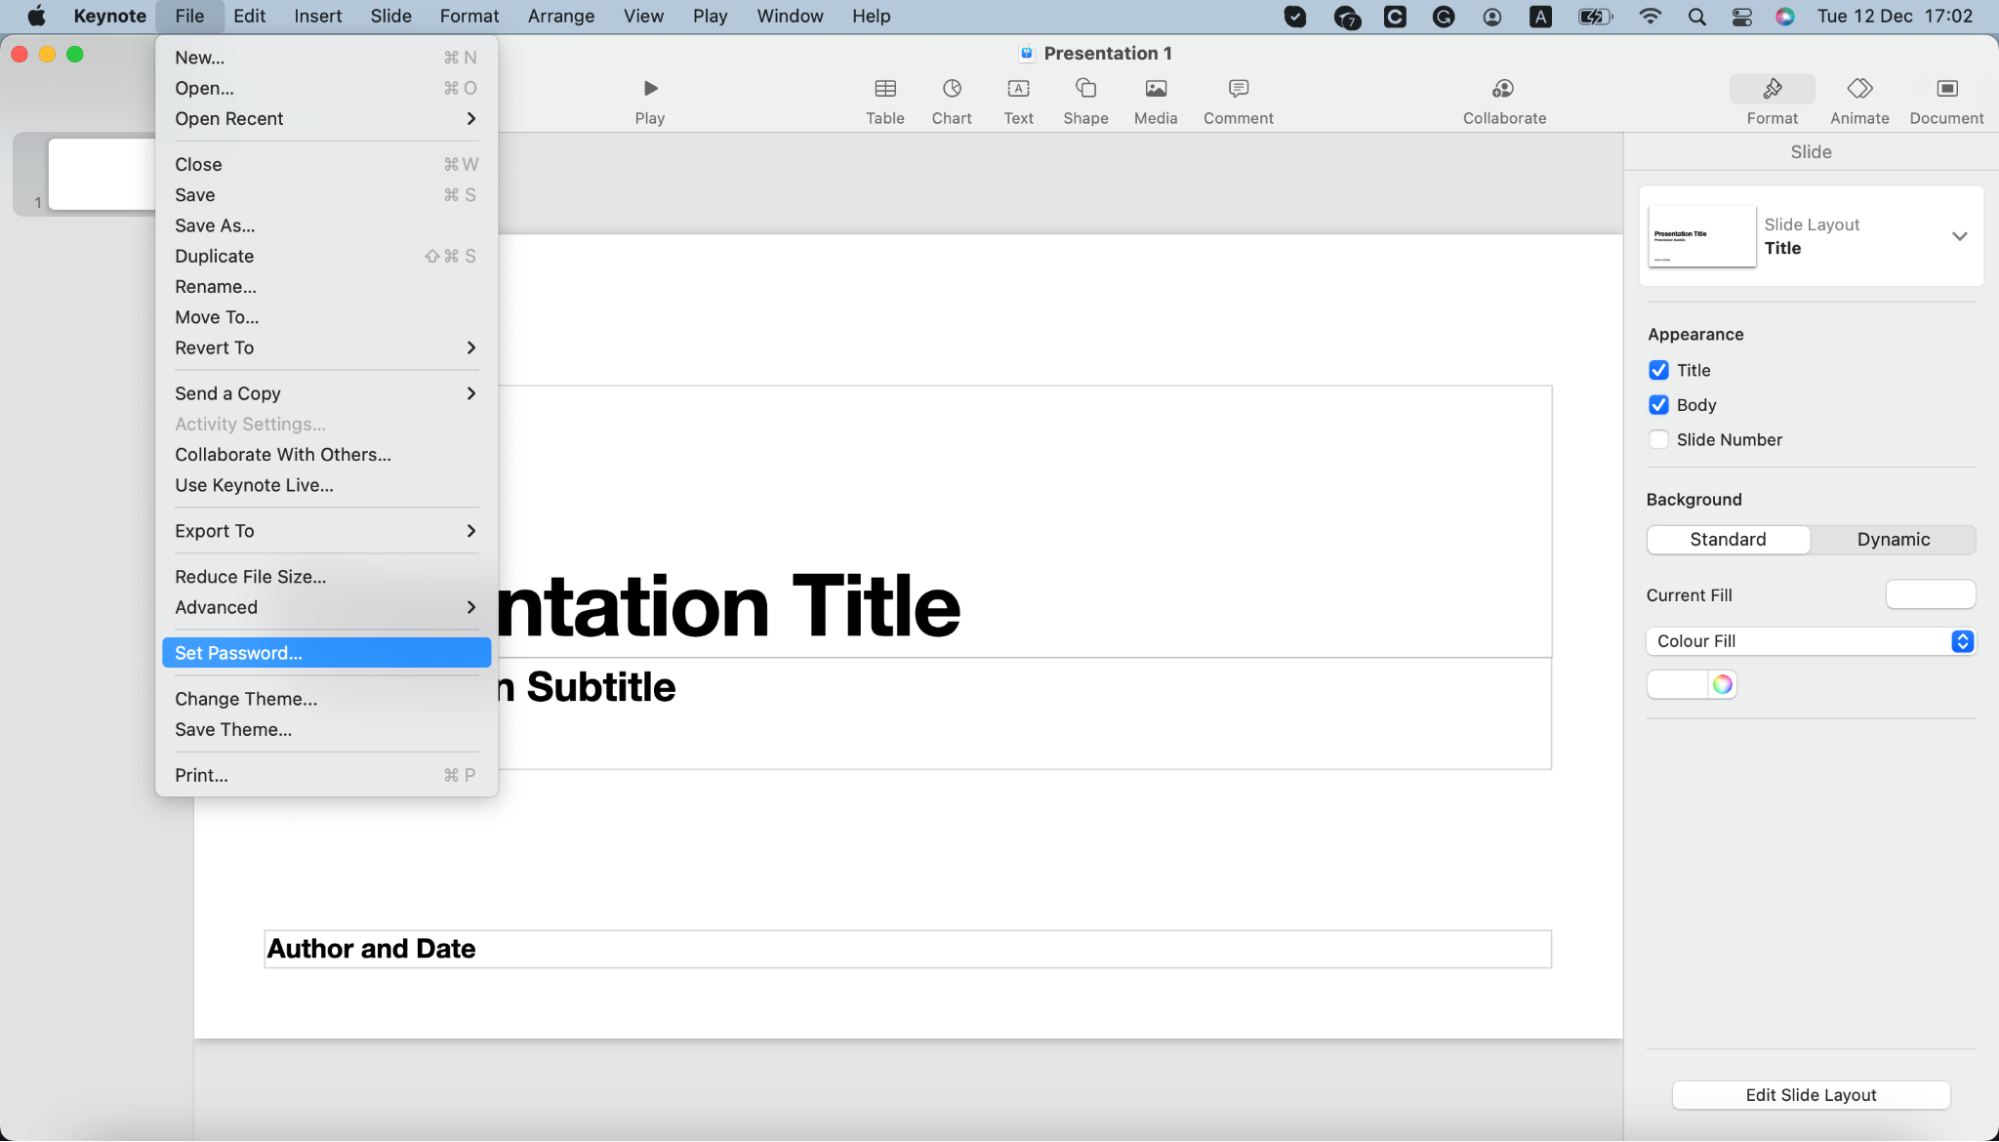 Step 1. Open your document in Pages, Numbers, or Keynote.